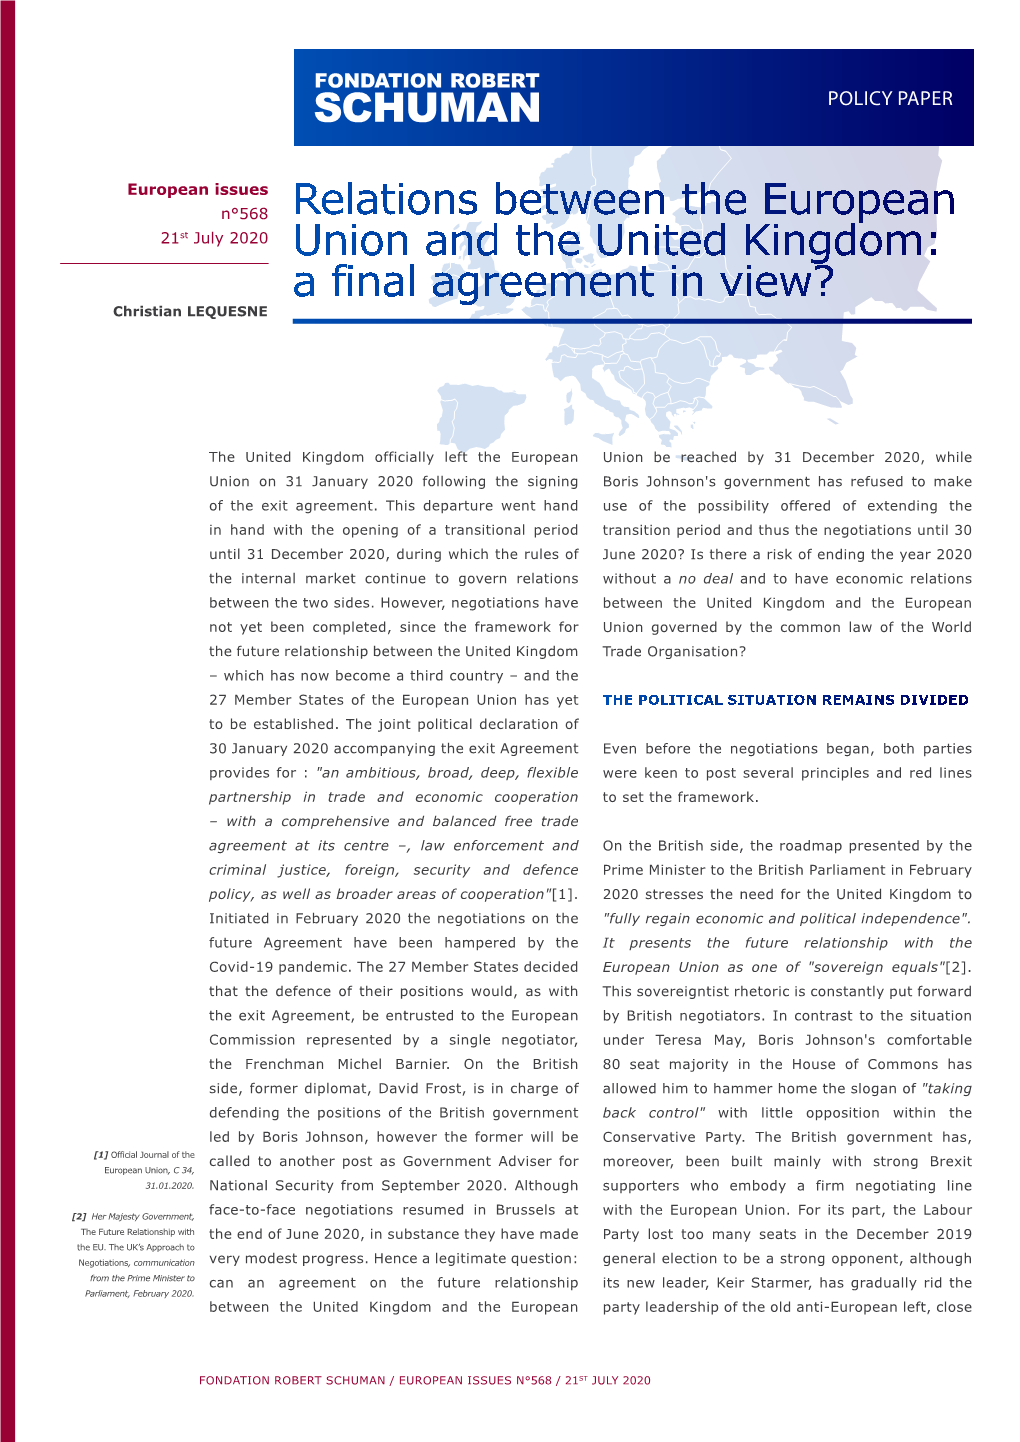 Relations Between the European Union and the United Kingdom: a Final Agreement in View?